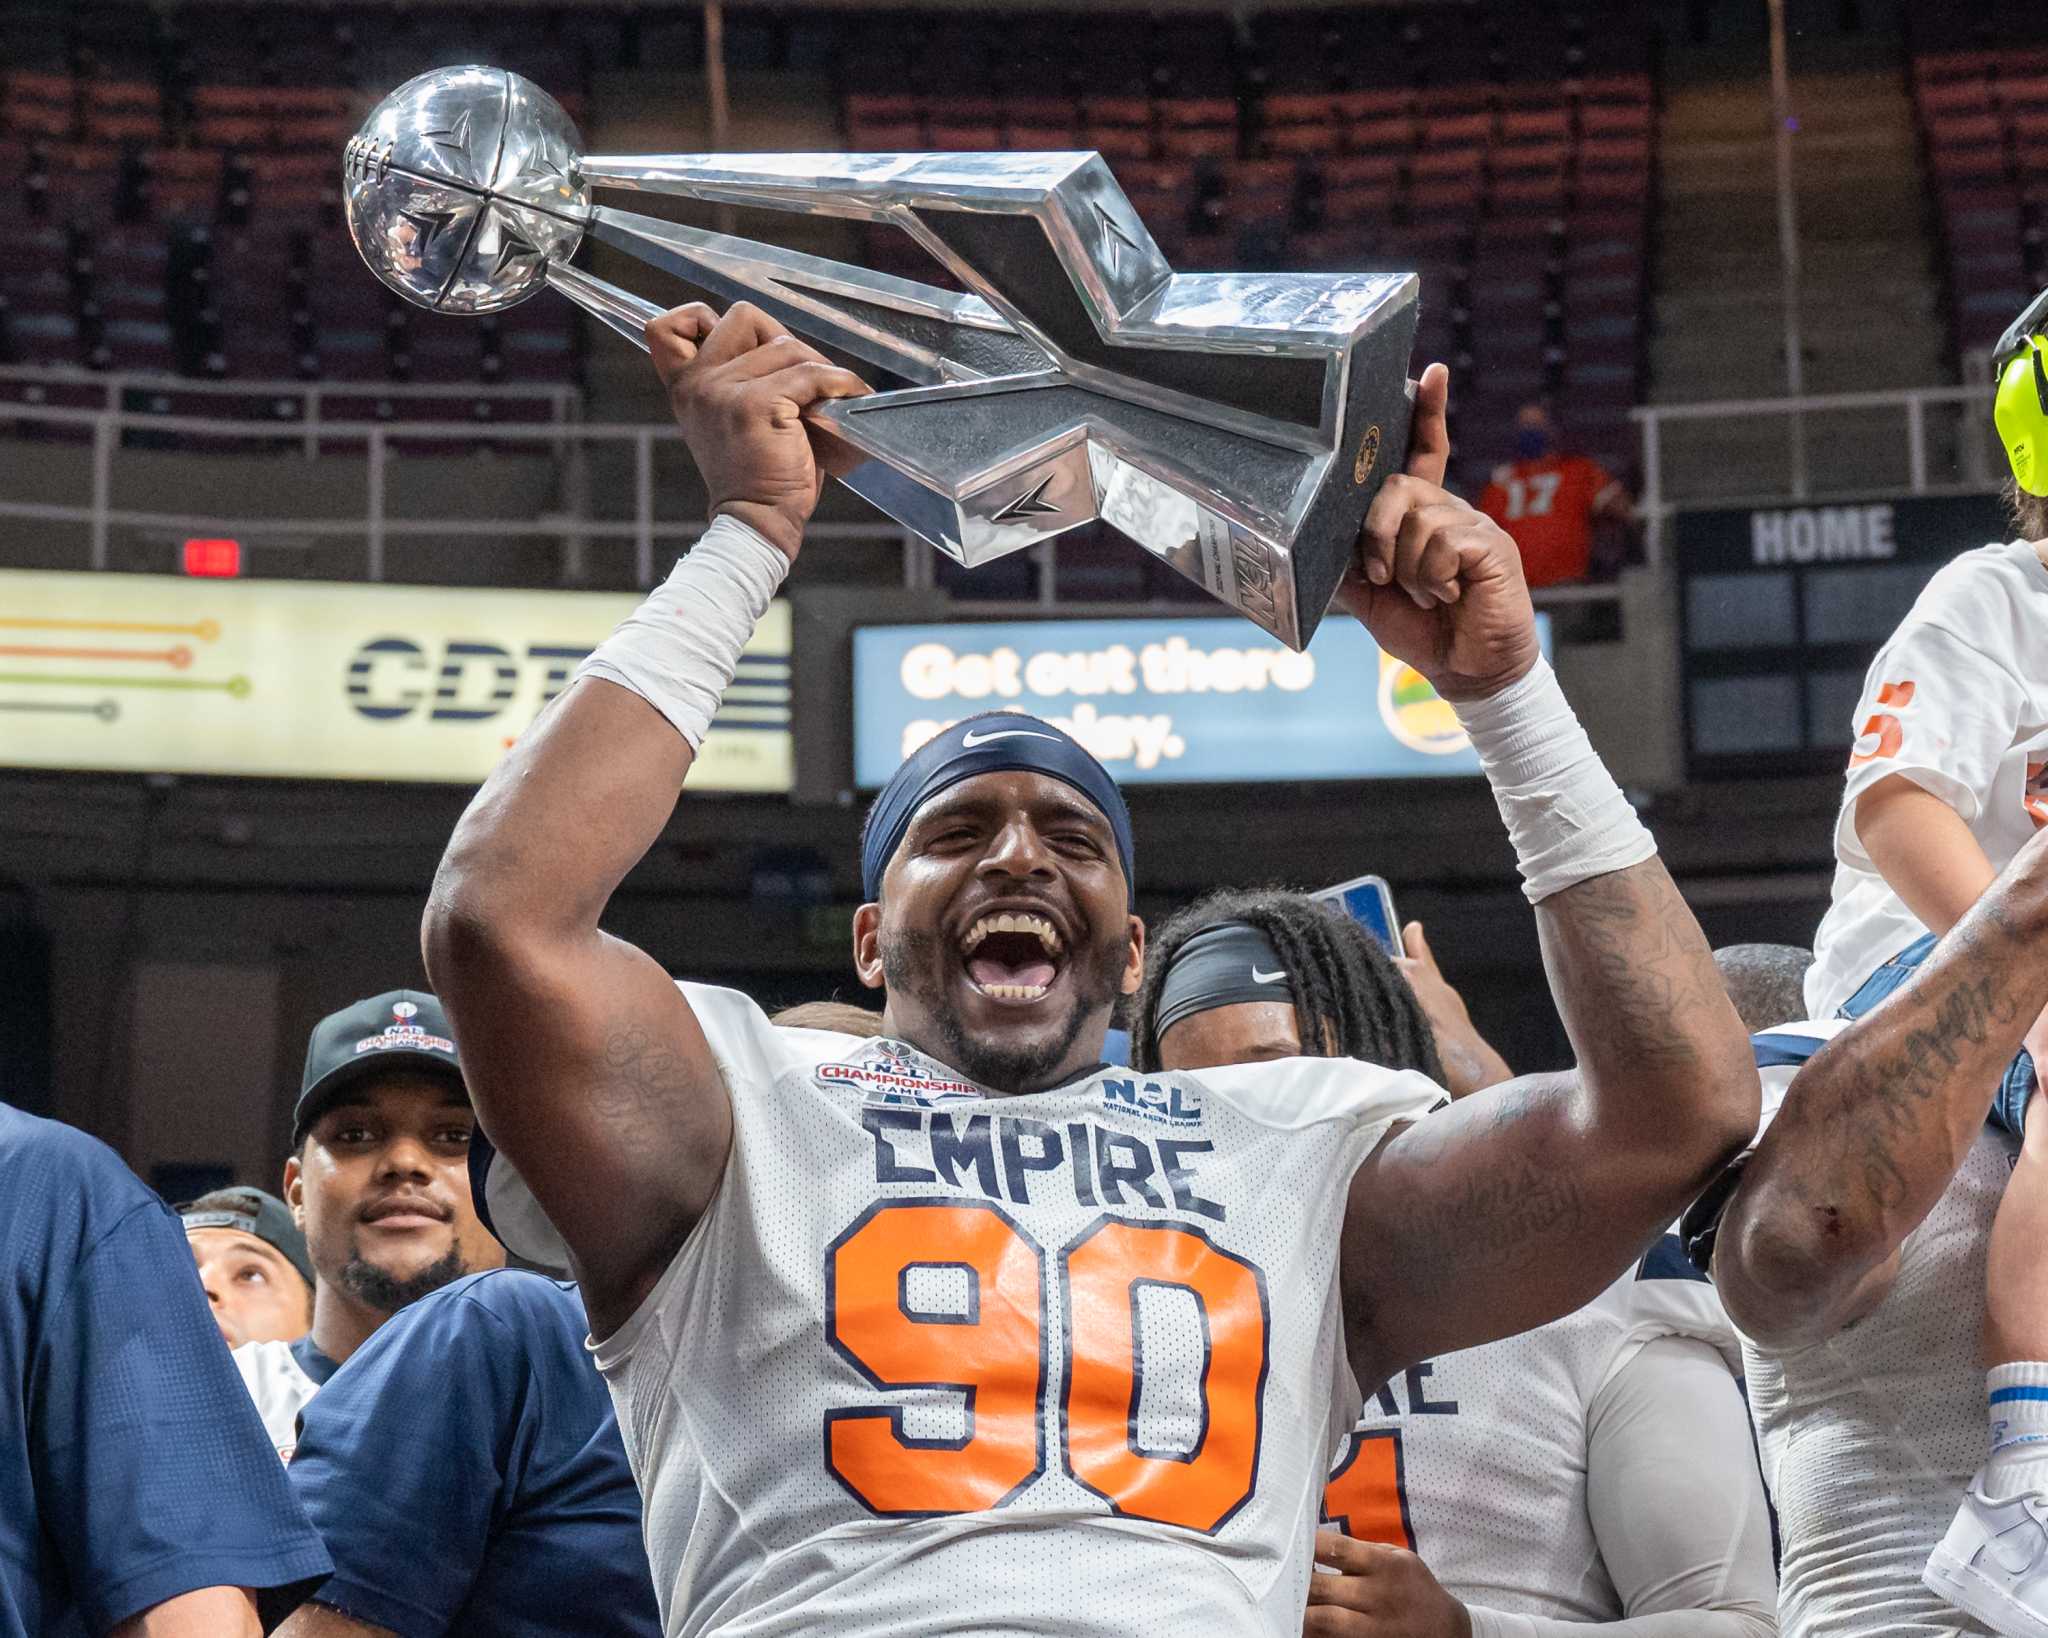 Empire bring another arena football championship to Albany